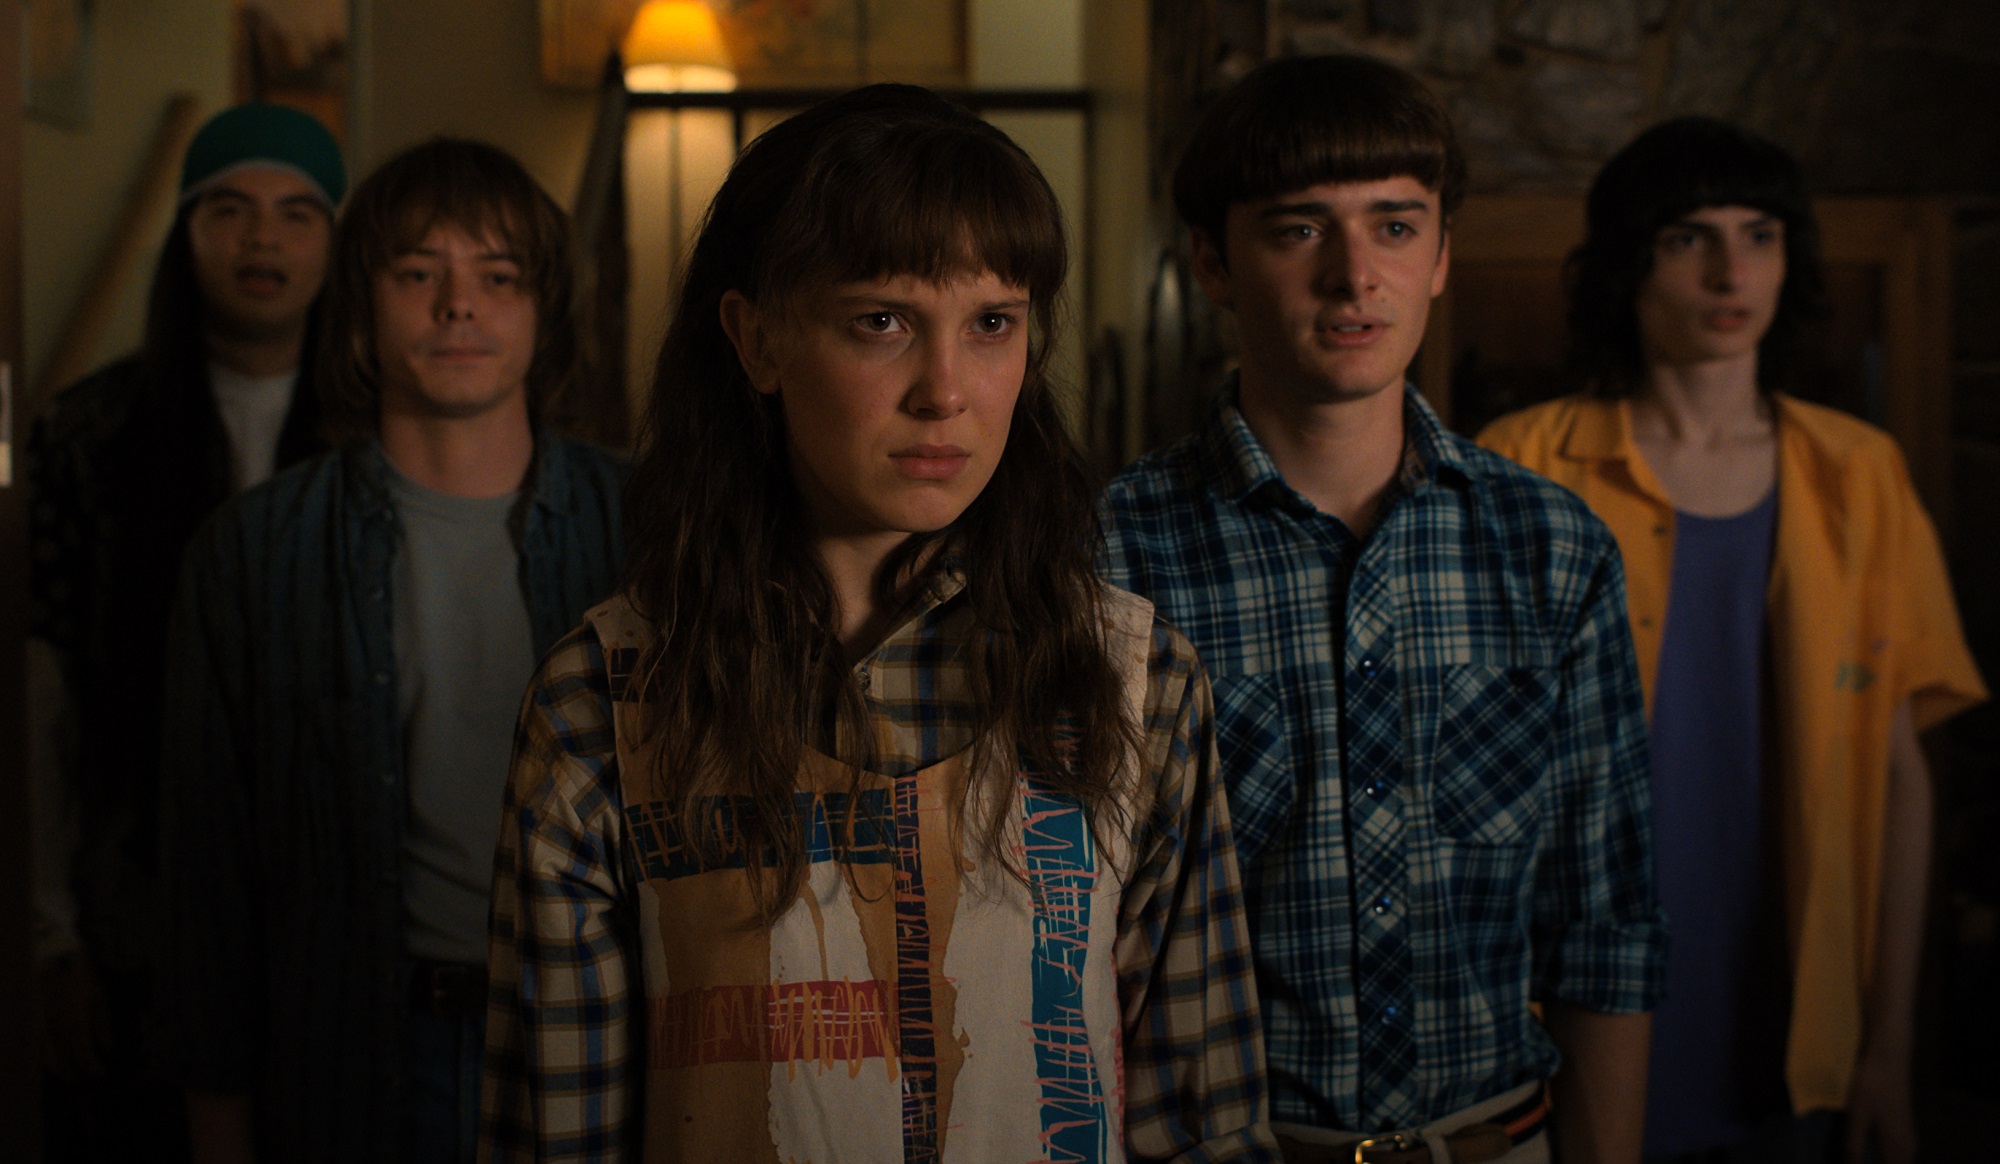 Why The Stranger Things Season 4 Finale Runtime Was So Long